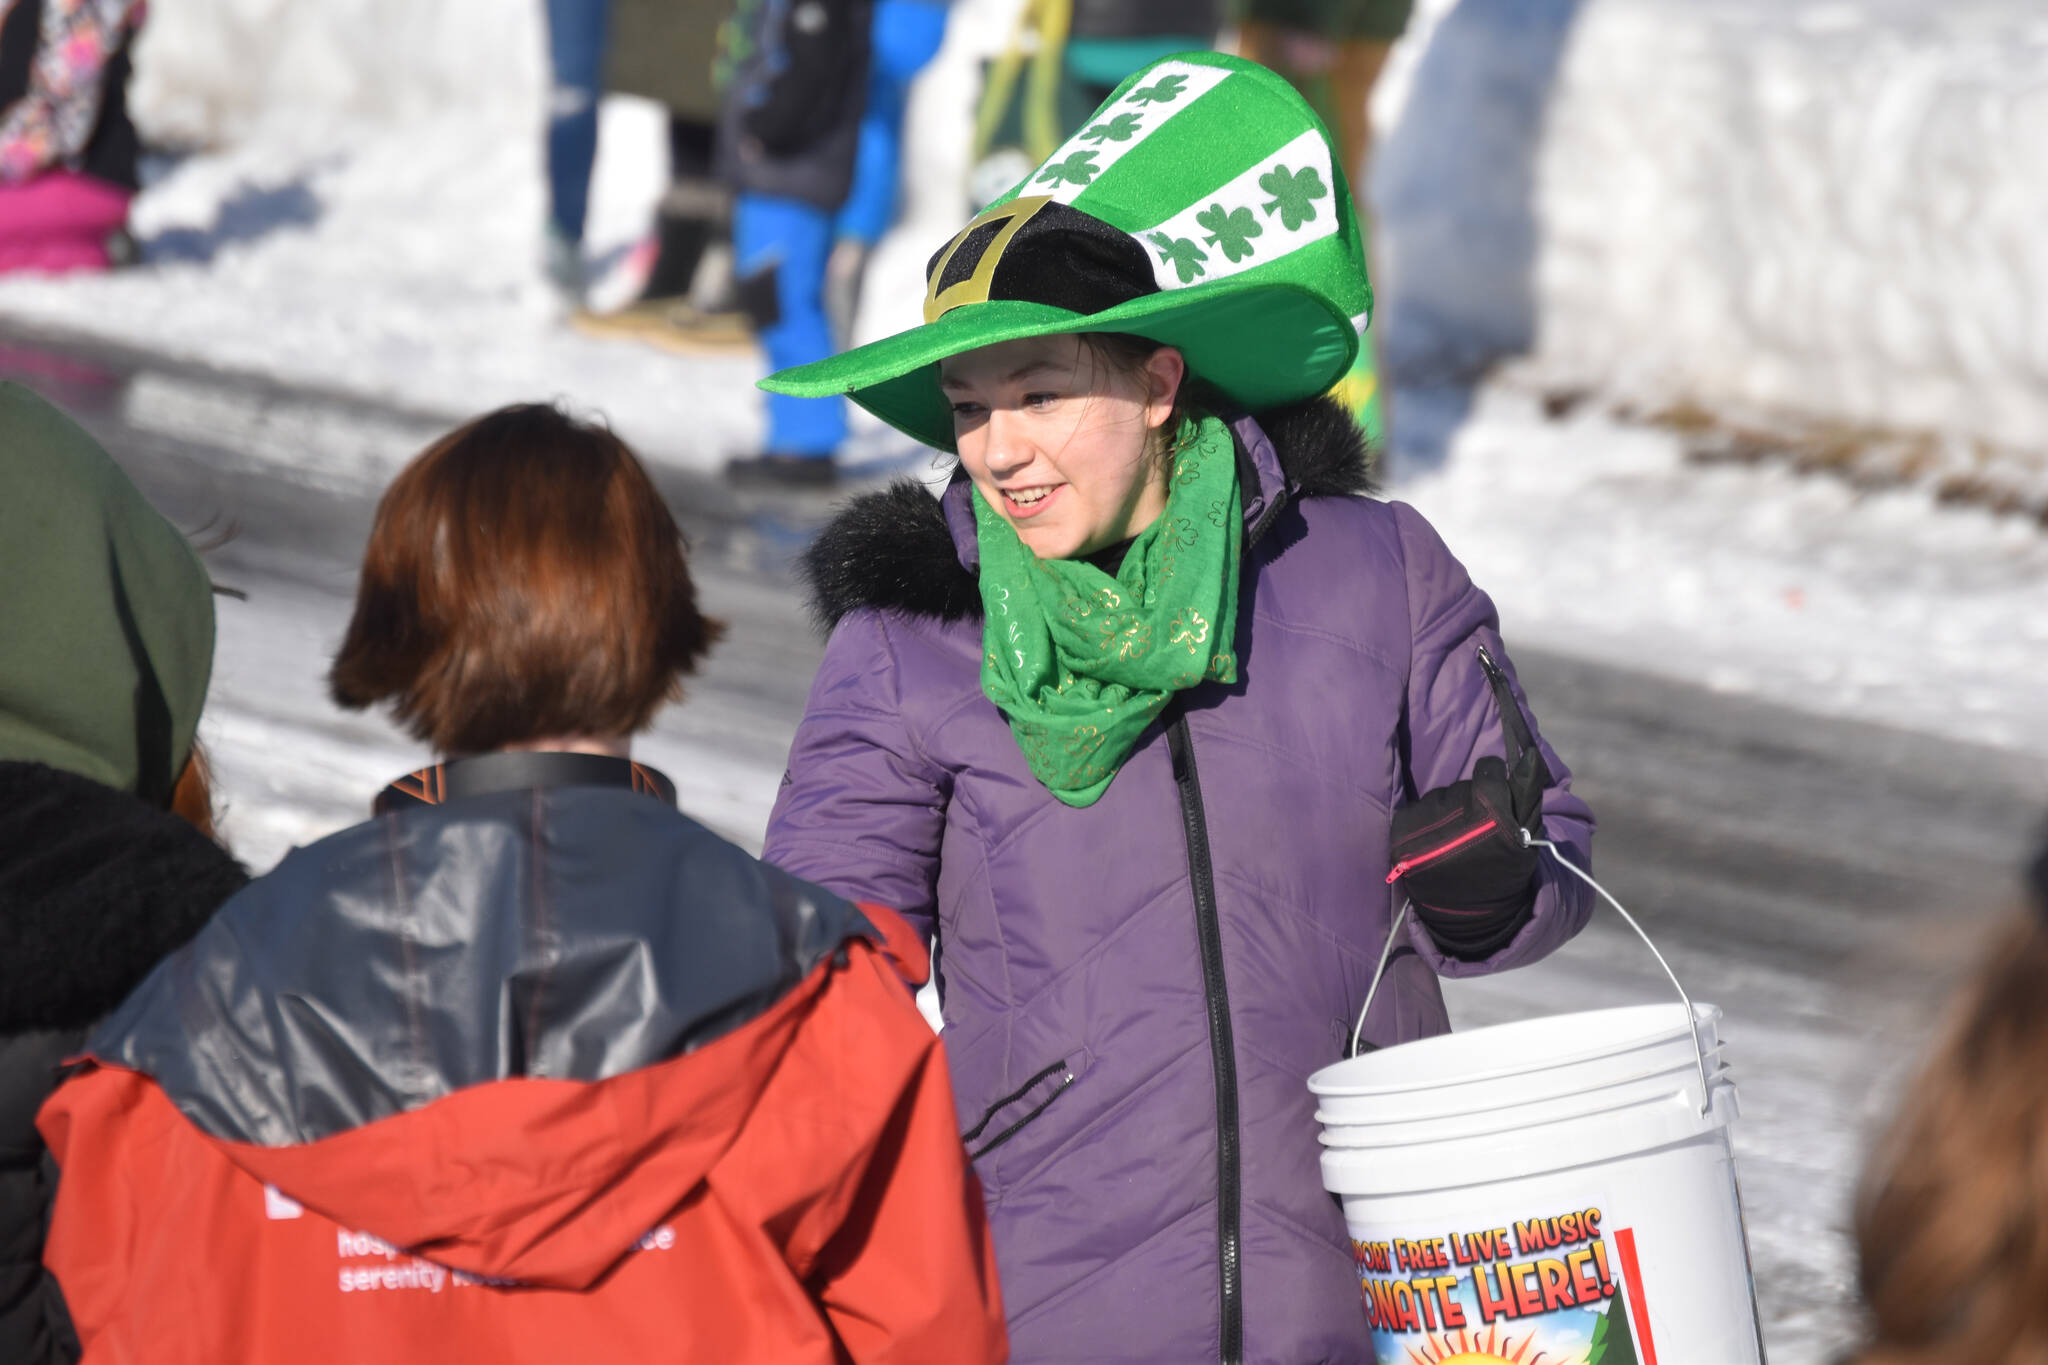 A woman in a big green hat passes out candy as the 32nd annual Sweeney’s St. Patrick’s Day Parade proceeds down Fireweed Street in Soldotna, Alaska on Friday, March 17, 2023. (Jake Dye/Peninsula Clarion)